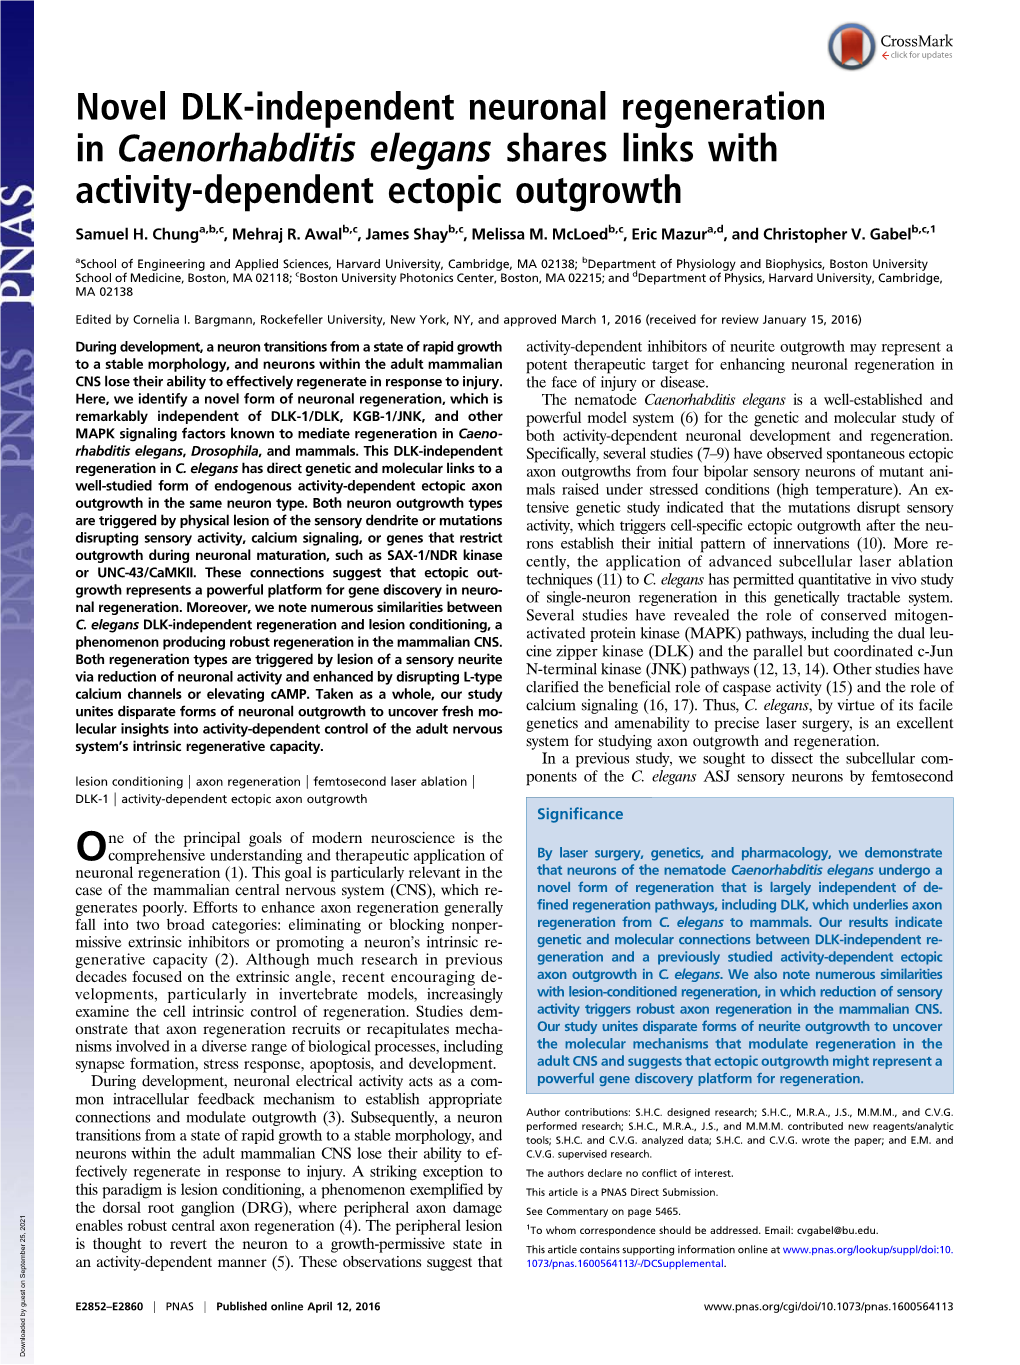 Novel DLK-Independent Neuronal Regeneration in Caenorhabditis Elegans Shares Links with Activity-Dependent Ectopic Outgrowth